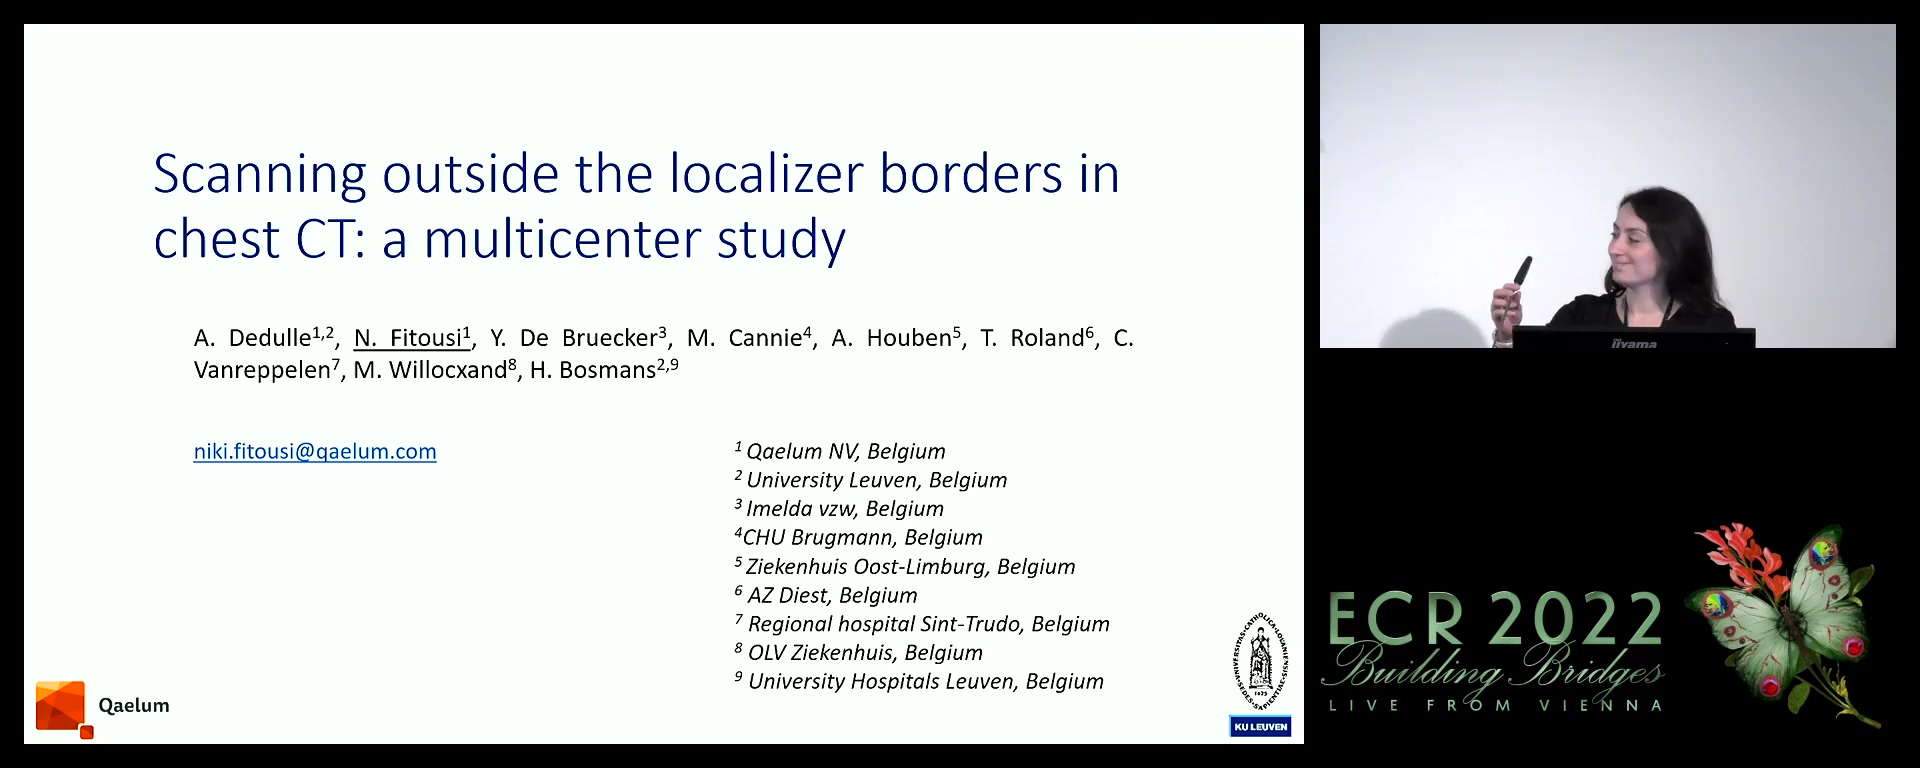 Scanning outside the localiser borders in chest CT: a multicentre study - Niki Fitousi, Leuven / BE